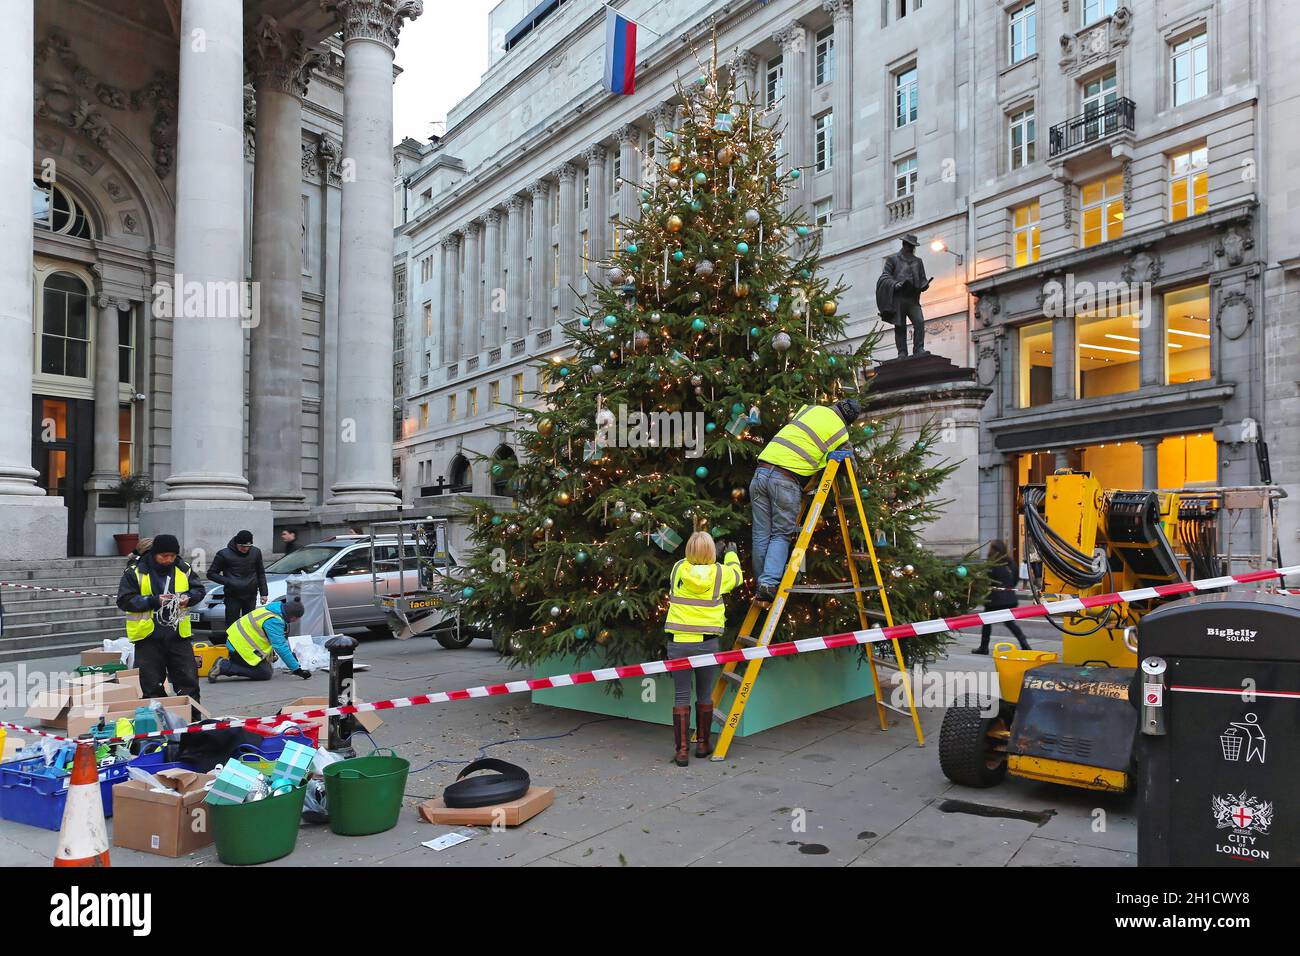 LONDON, UNITED KINGDOM - NOVEMBER 23: Decorating Christmas tree in London on NOVEMBER 23, 2013. Workers erected big Christmas tree in front of Royal E Stock Photo